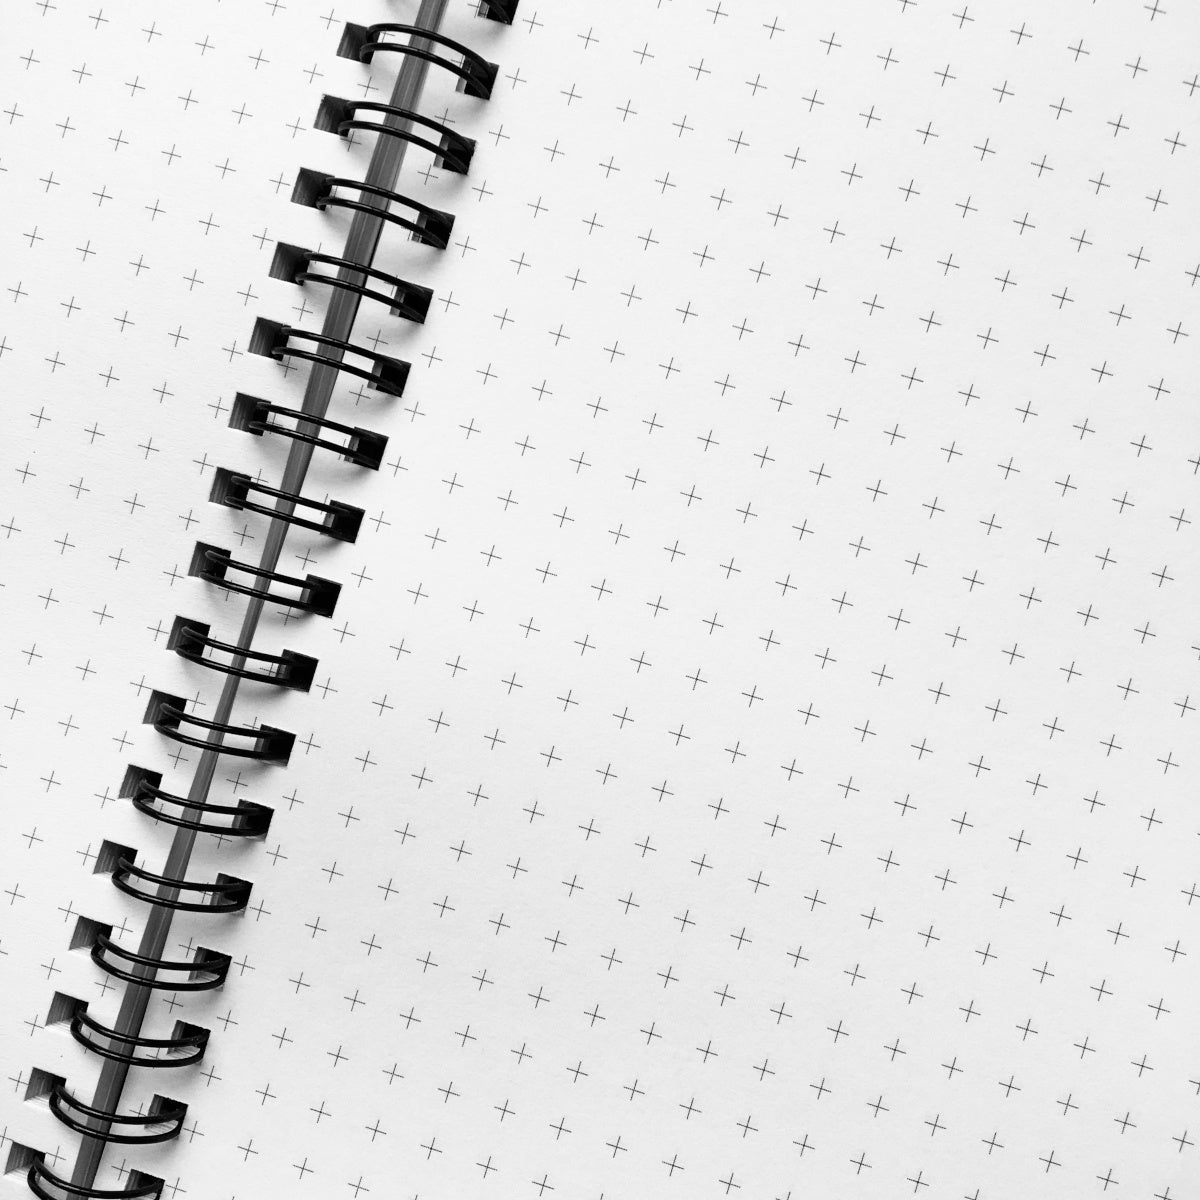 A close up picture of the grid graph paper option, showing the spiral wire binding and little crosses covering the white paper